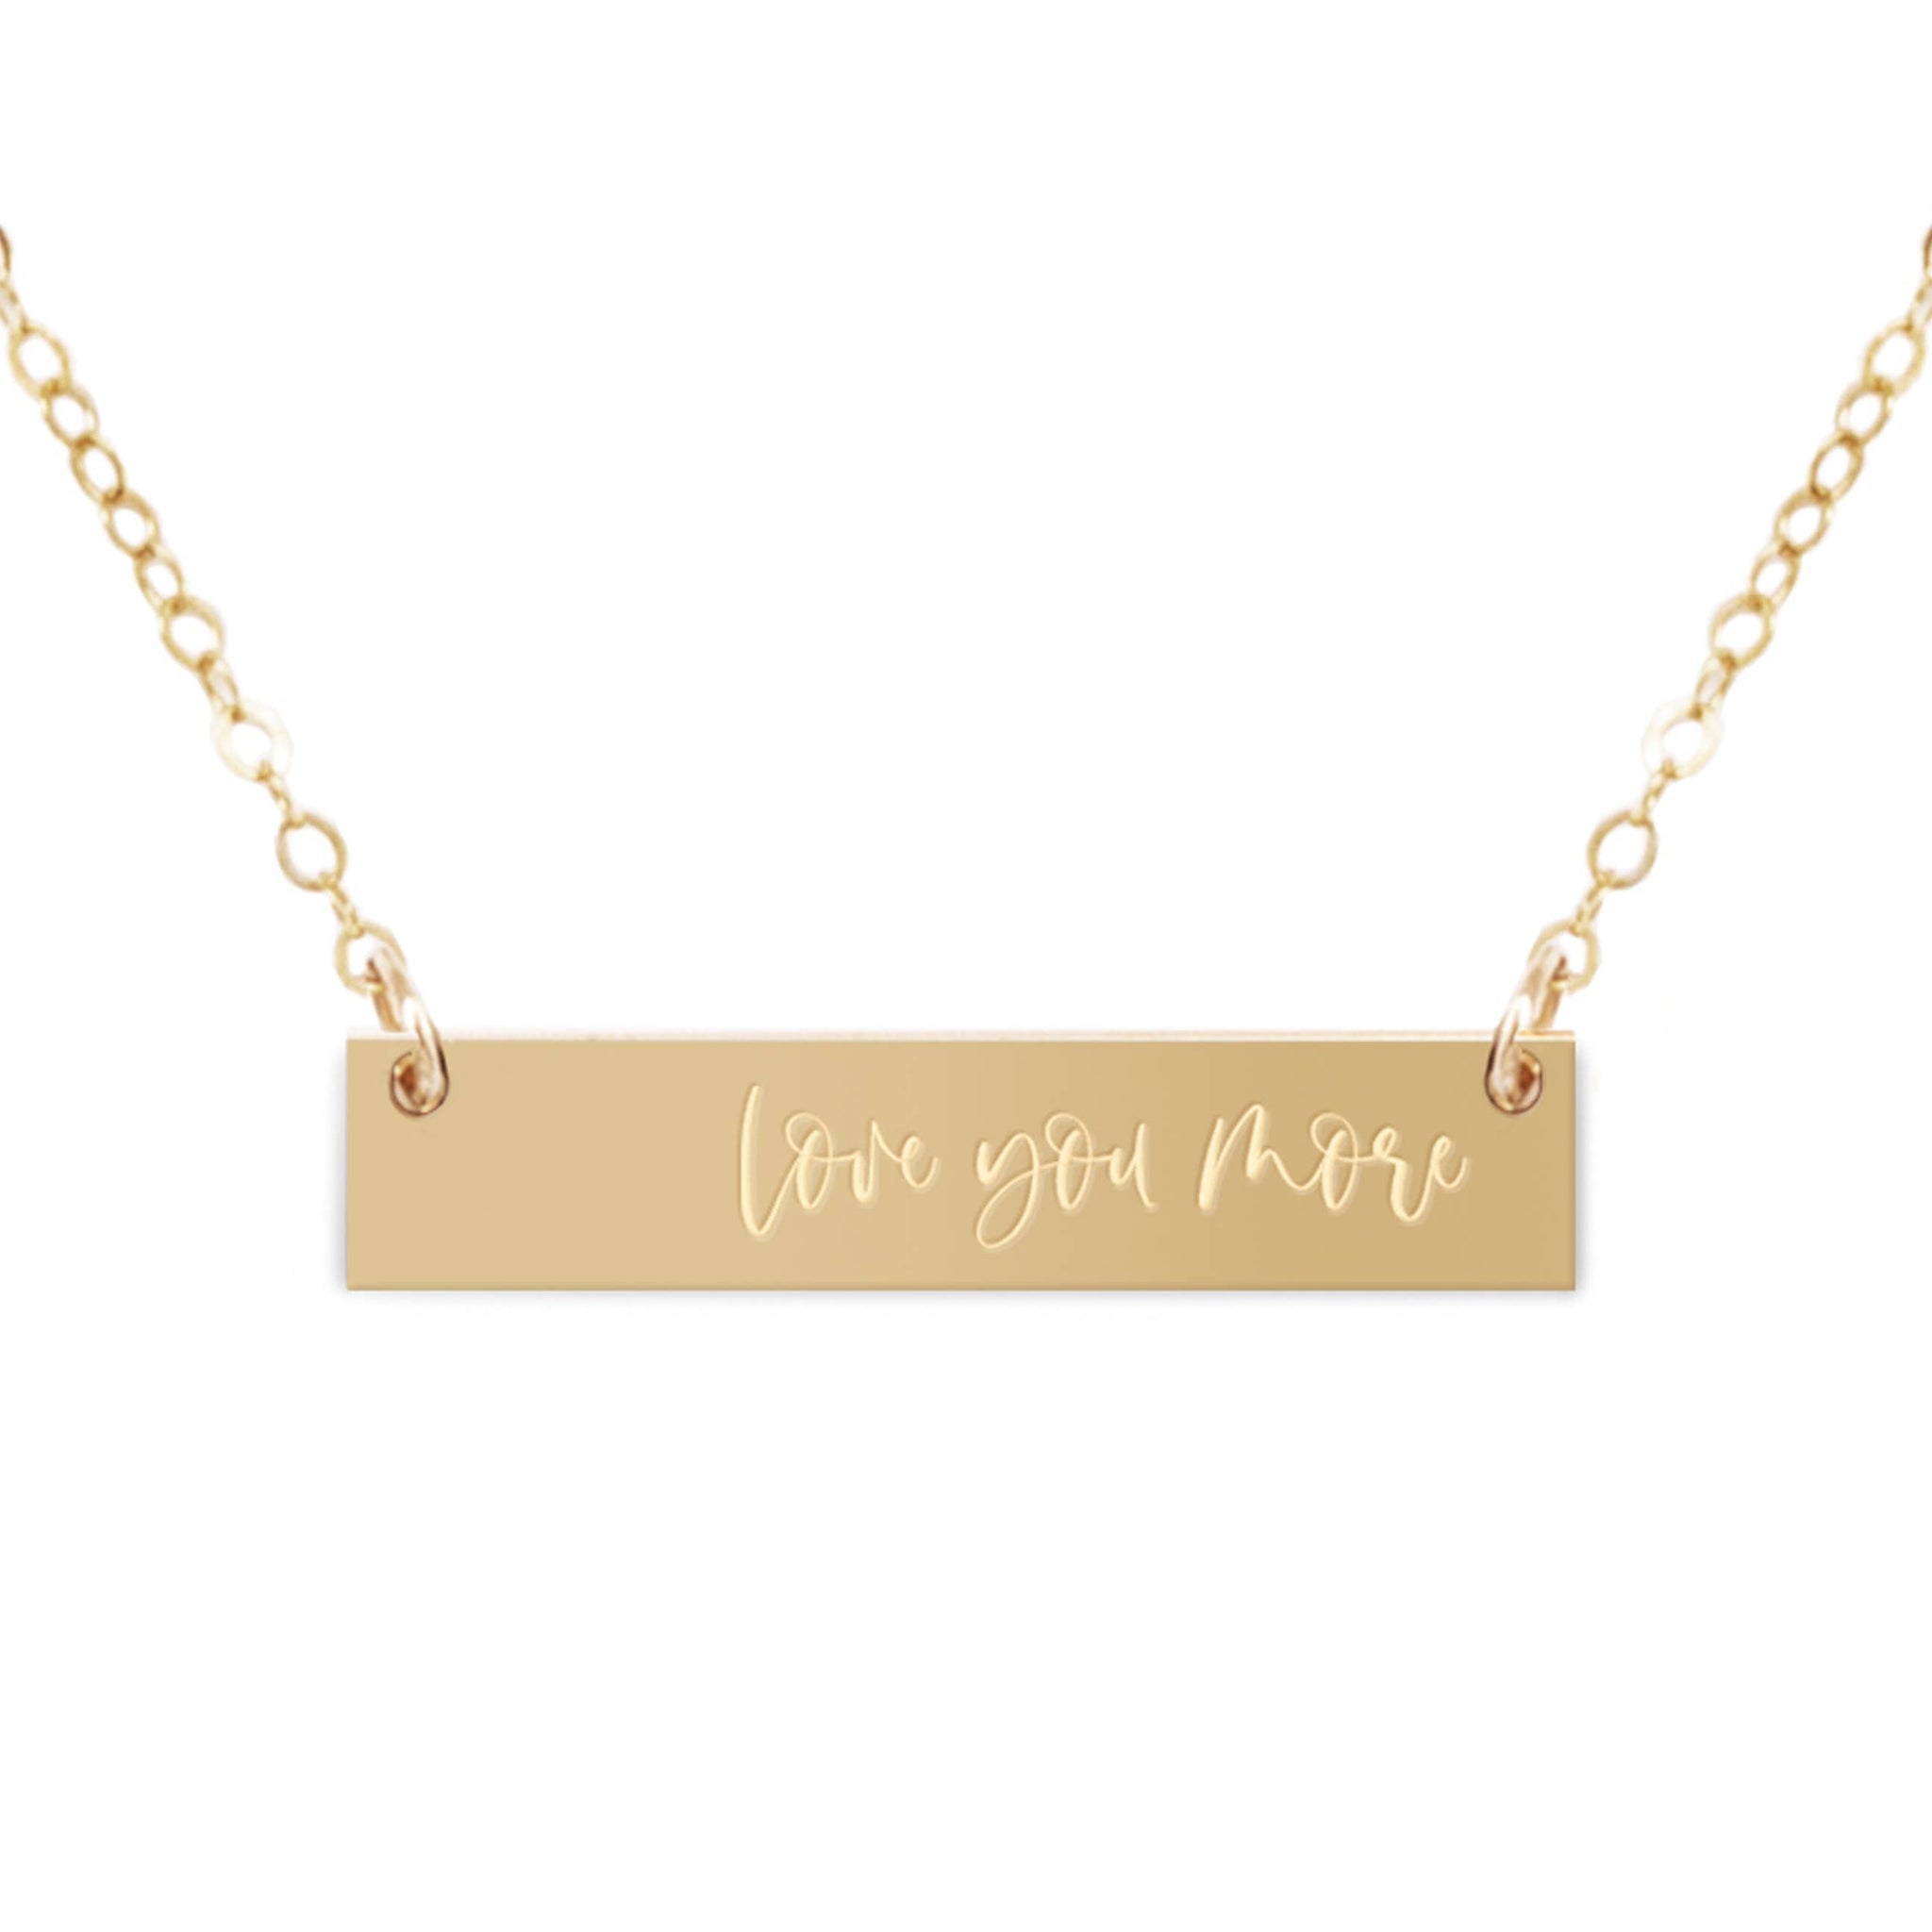 Zen and Zuri - Love You More Gold Filled Engraved Bar Necklace